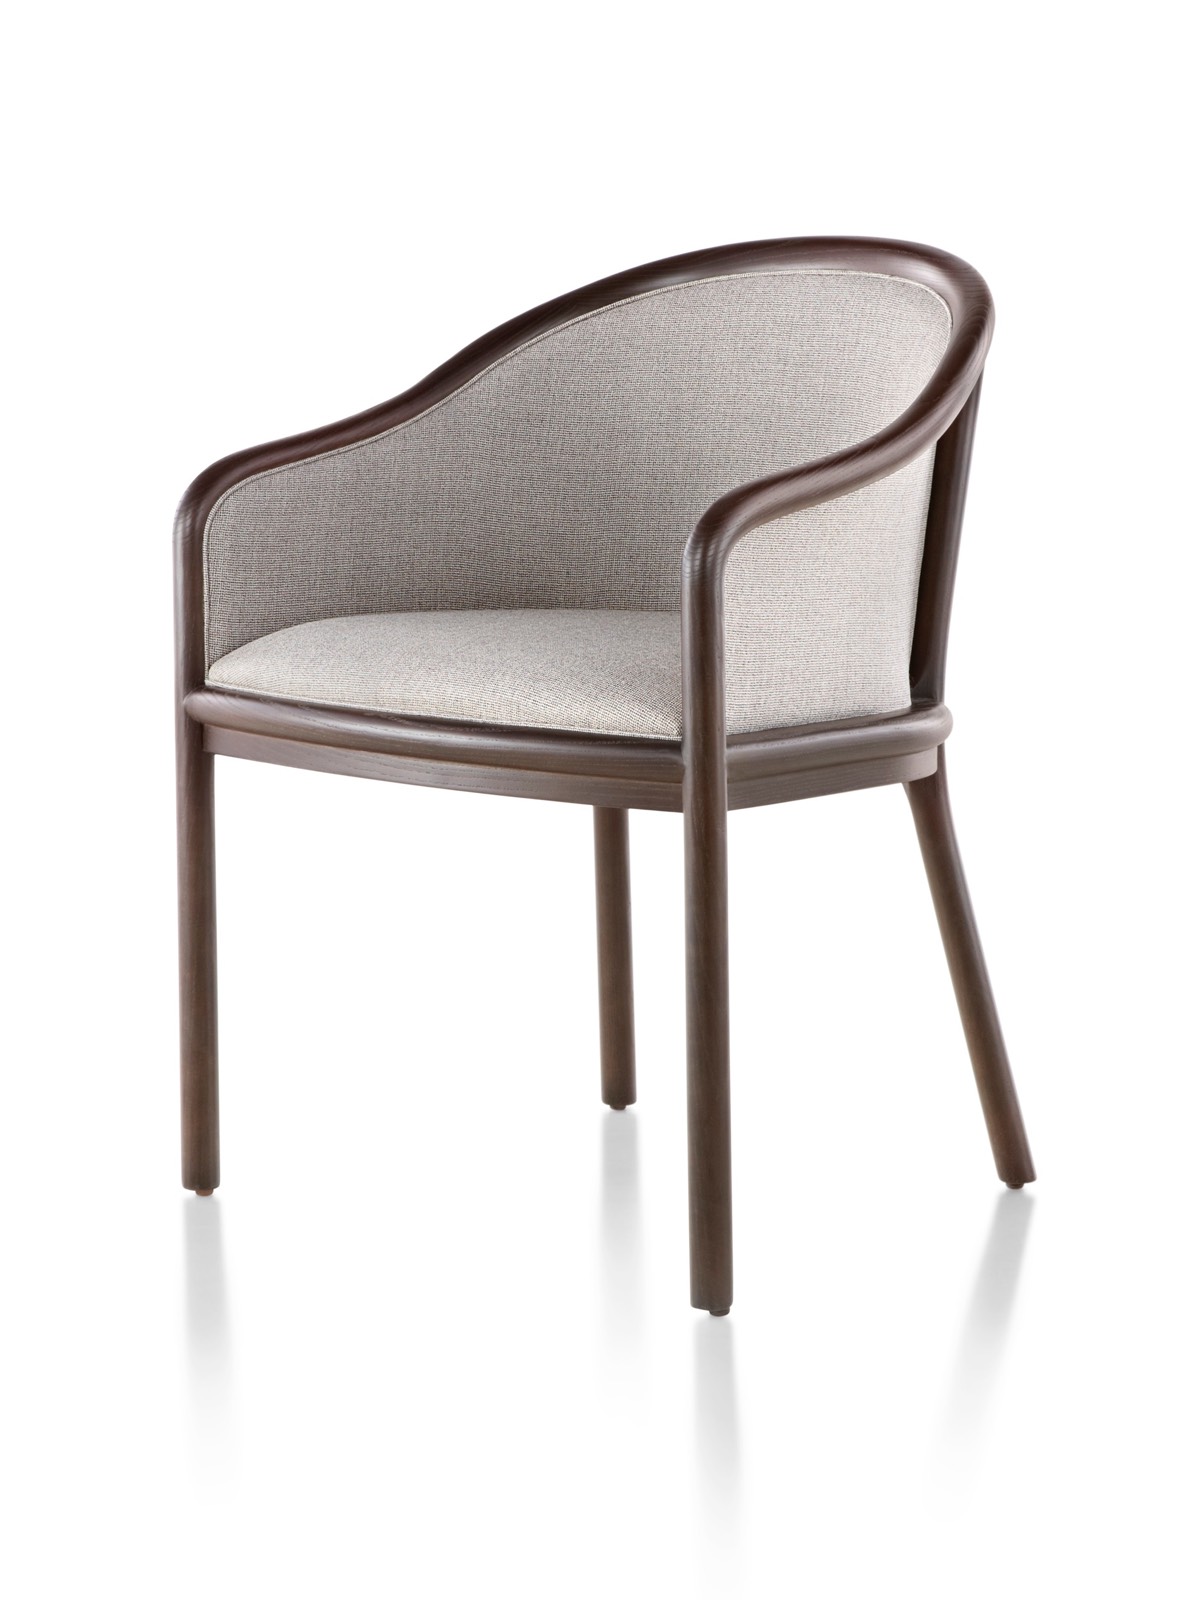 Landmark Chair with taupe upholstery and a dark wood finish, viewed from a 45-degree angle.